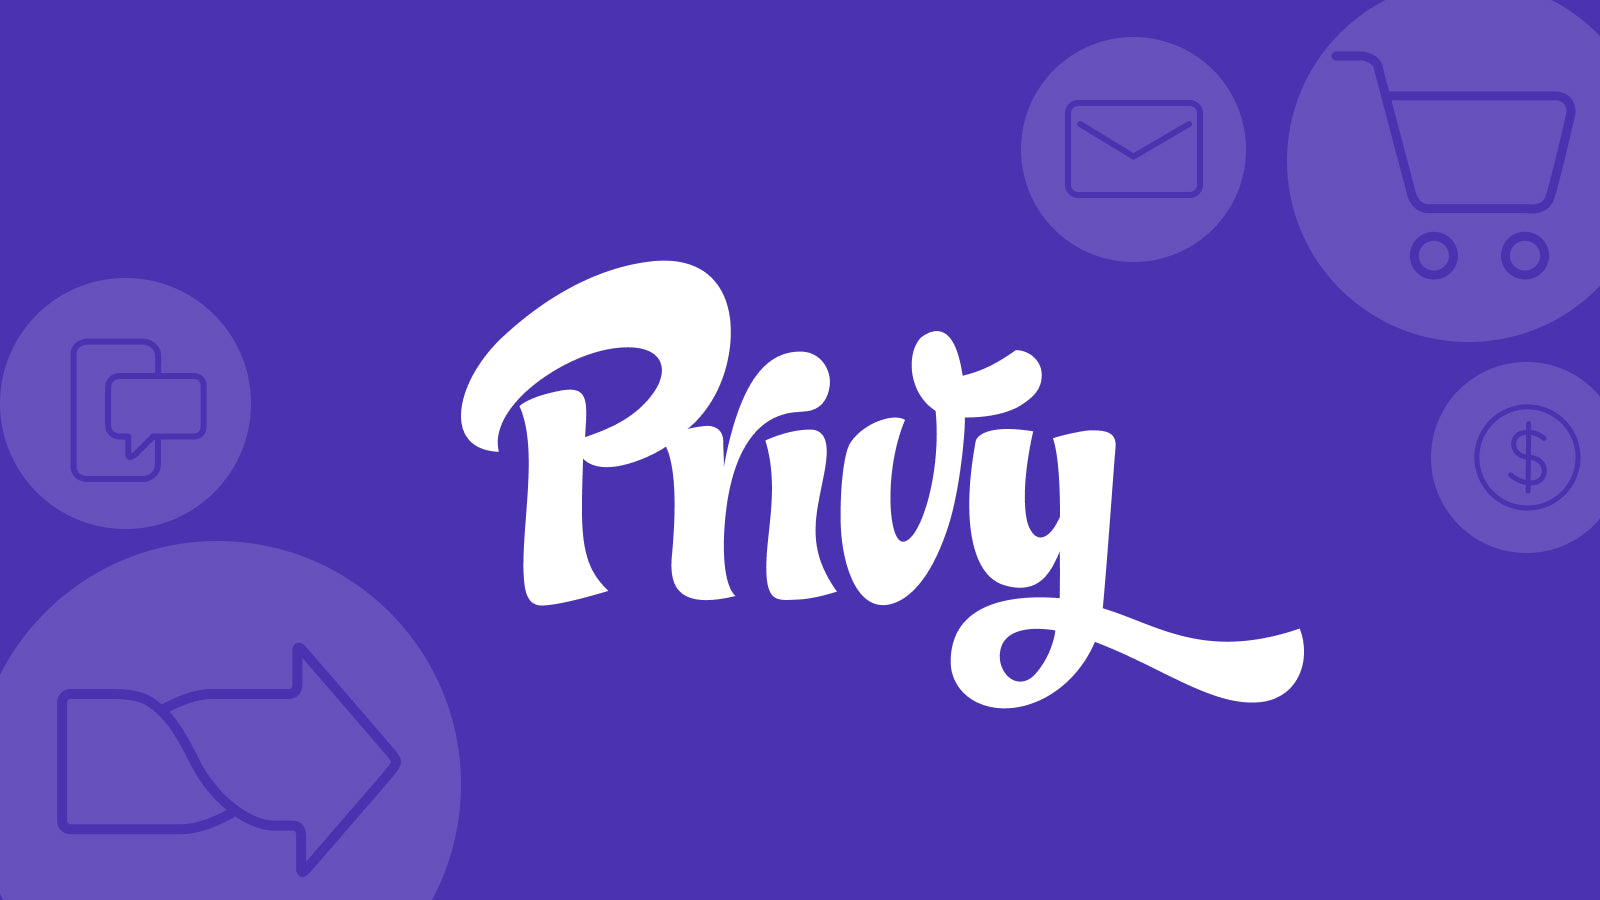 Privy ‑ Pop Ups, Email, & SMS - Email Marketing, SMS, Pop Ups, Cross Sell, Banners & Bars | Shopify App Store